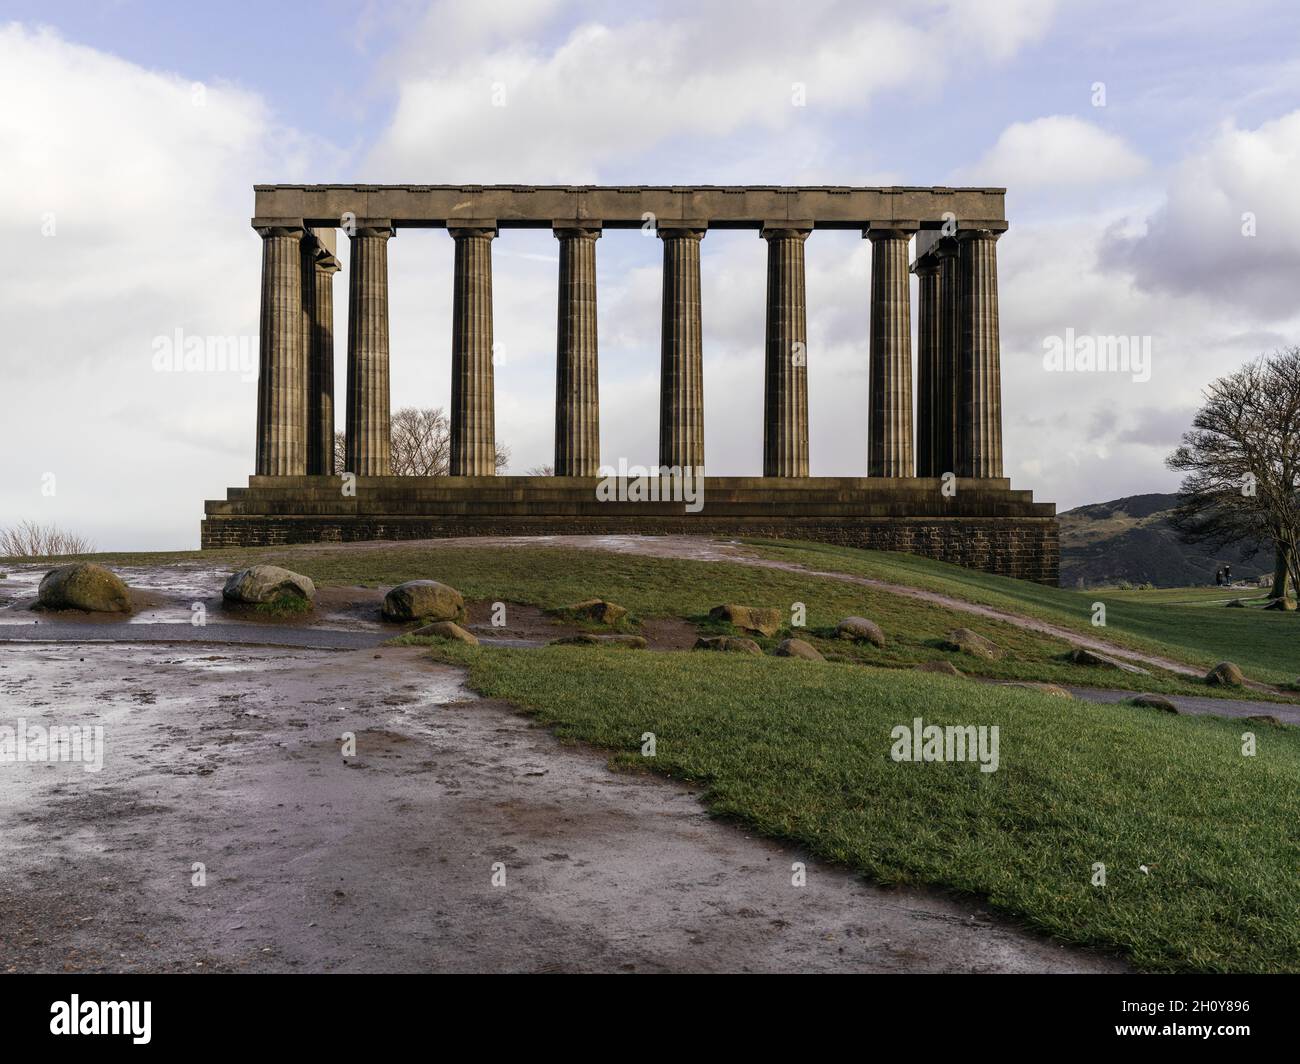 The National Monument Of Scotland On Calton Hill In Edinburgh on a sunny day after some rain. Stock Photo